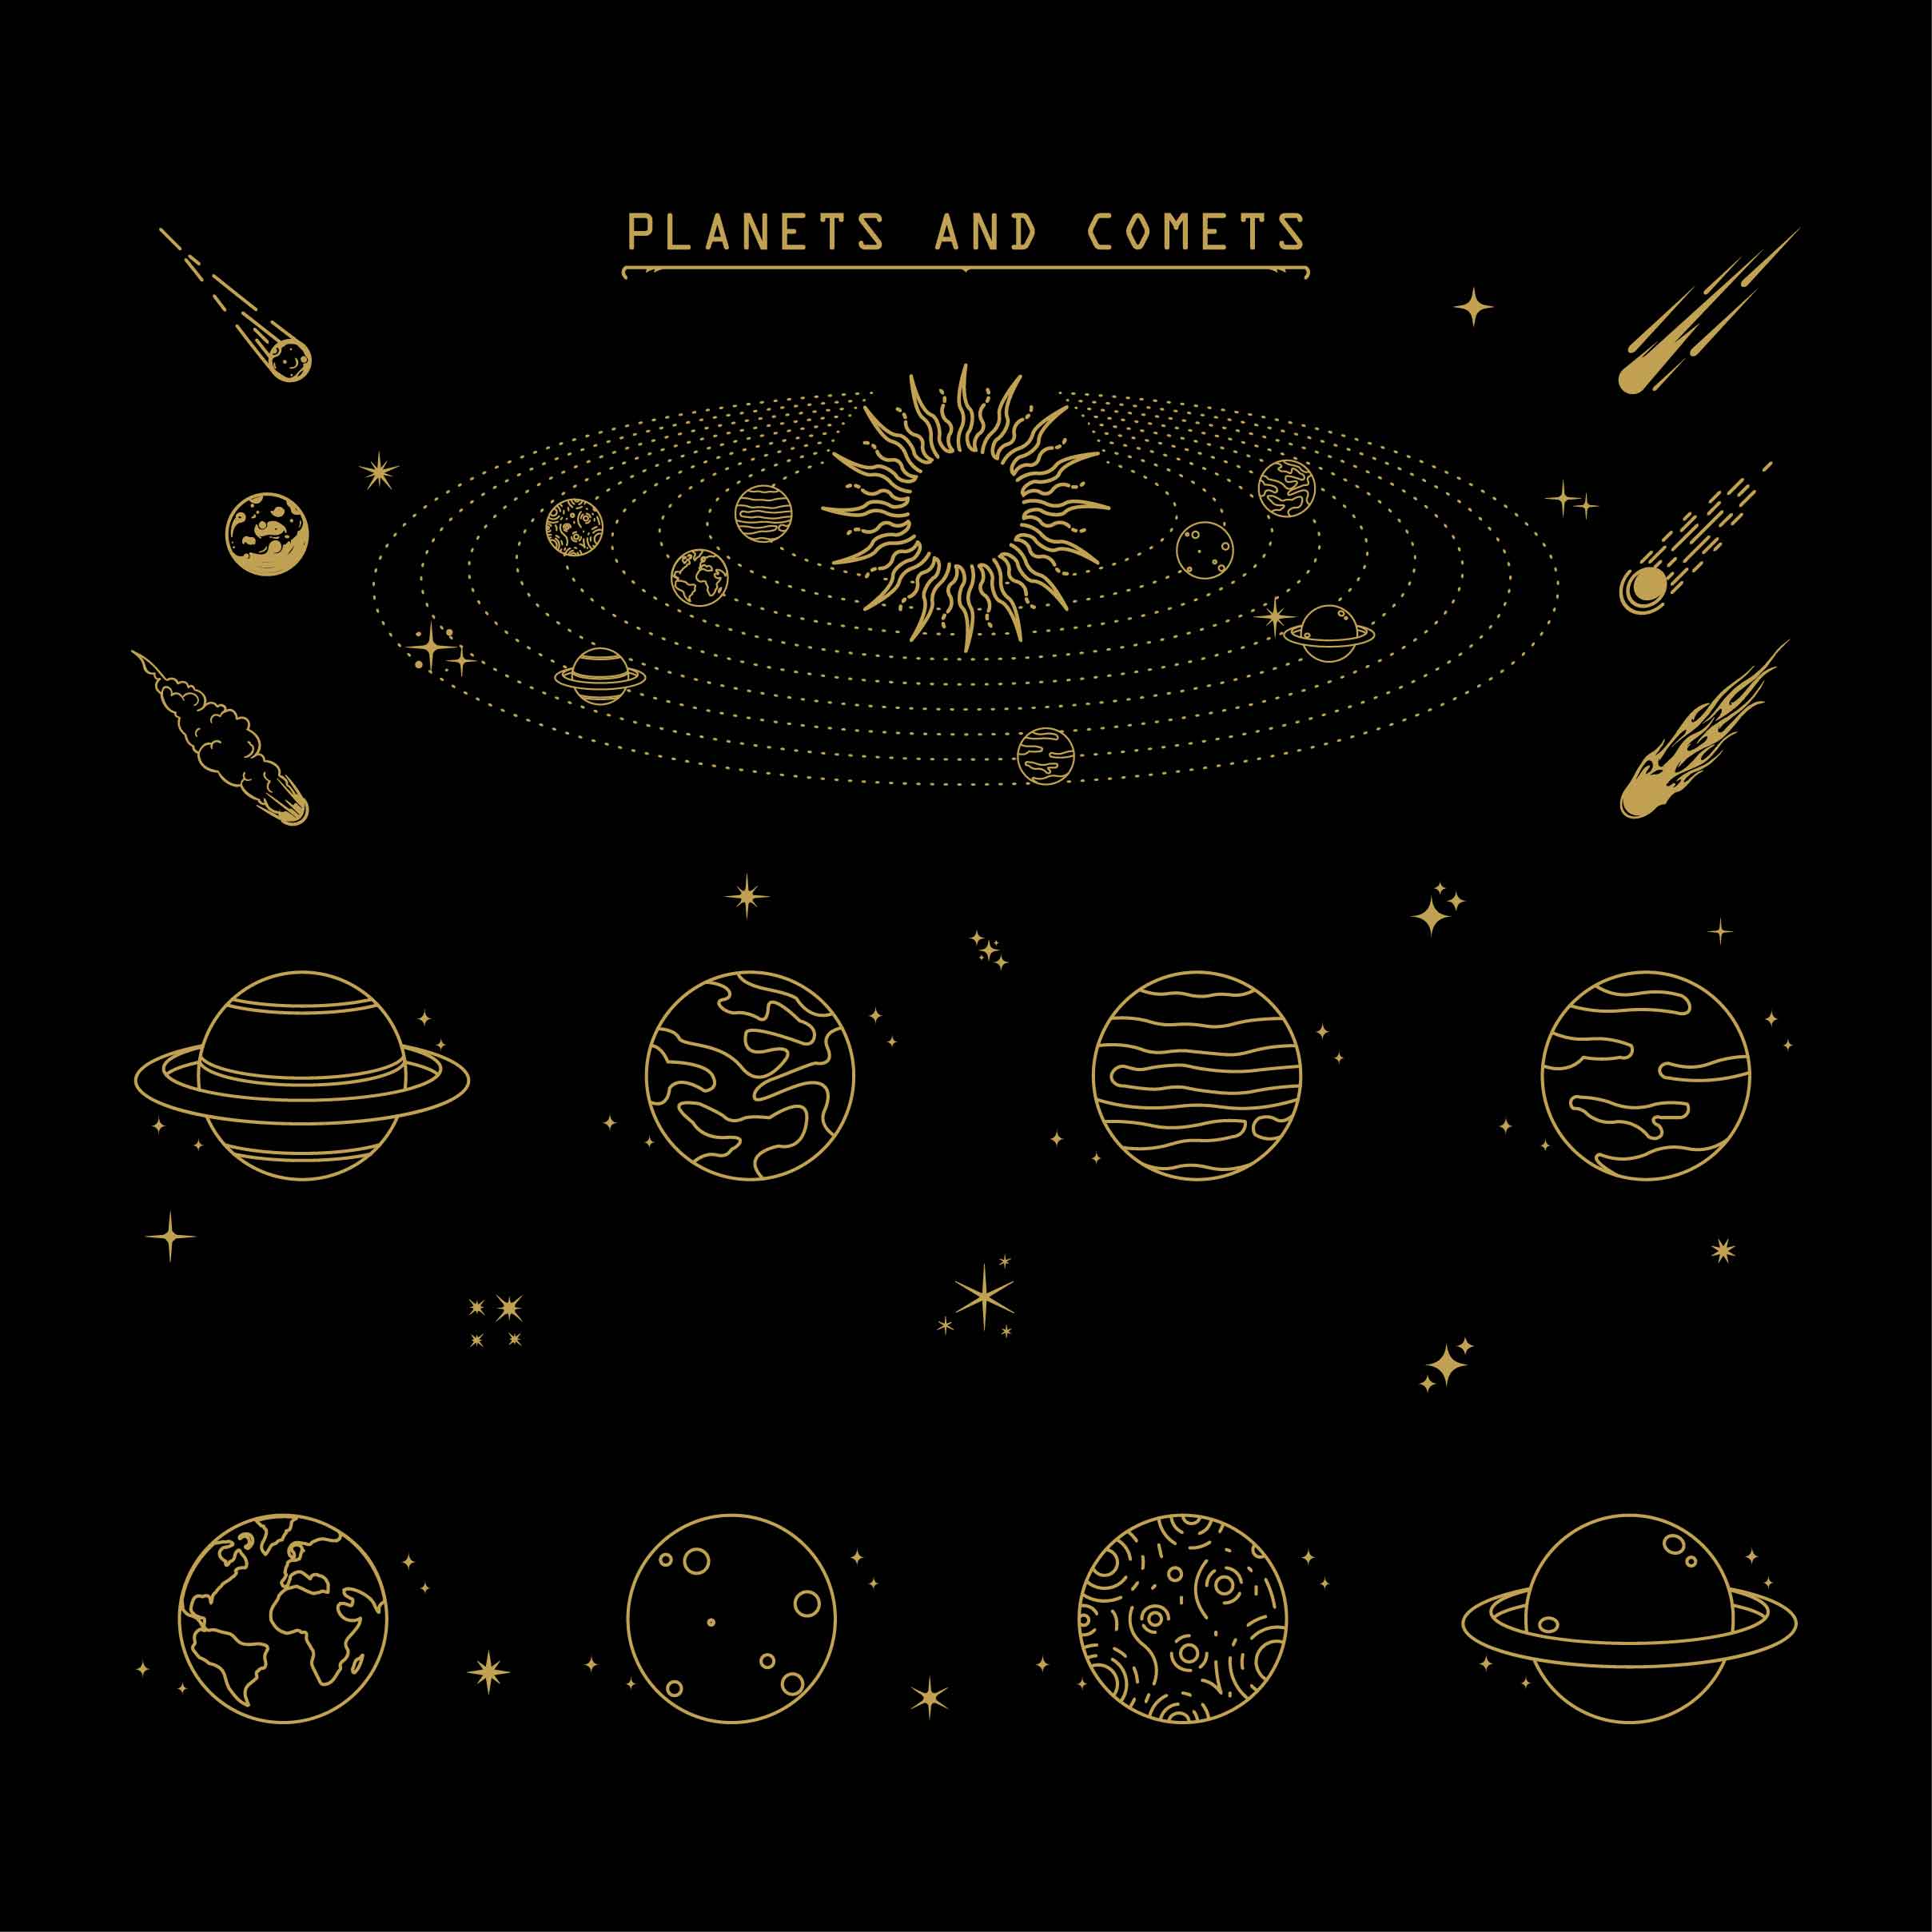 Mystical and Celestial Elements Illustration, planets and comets.